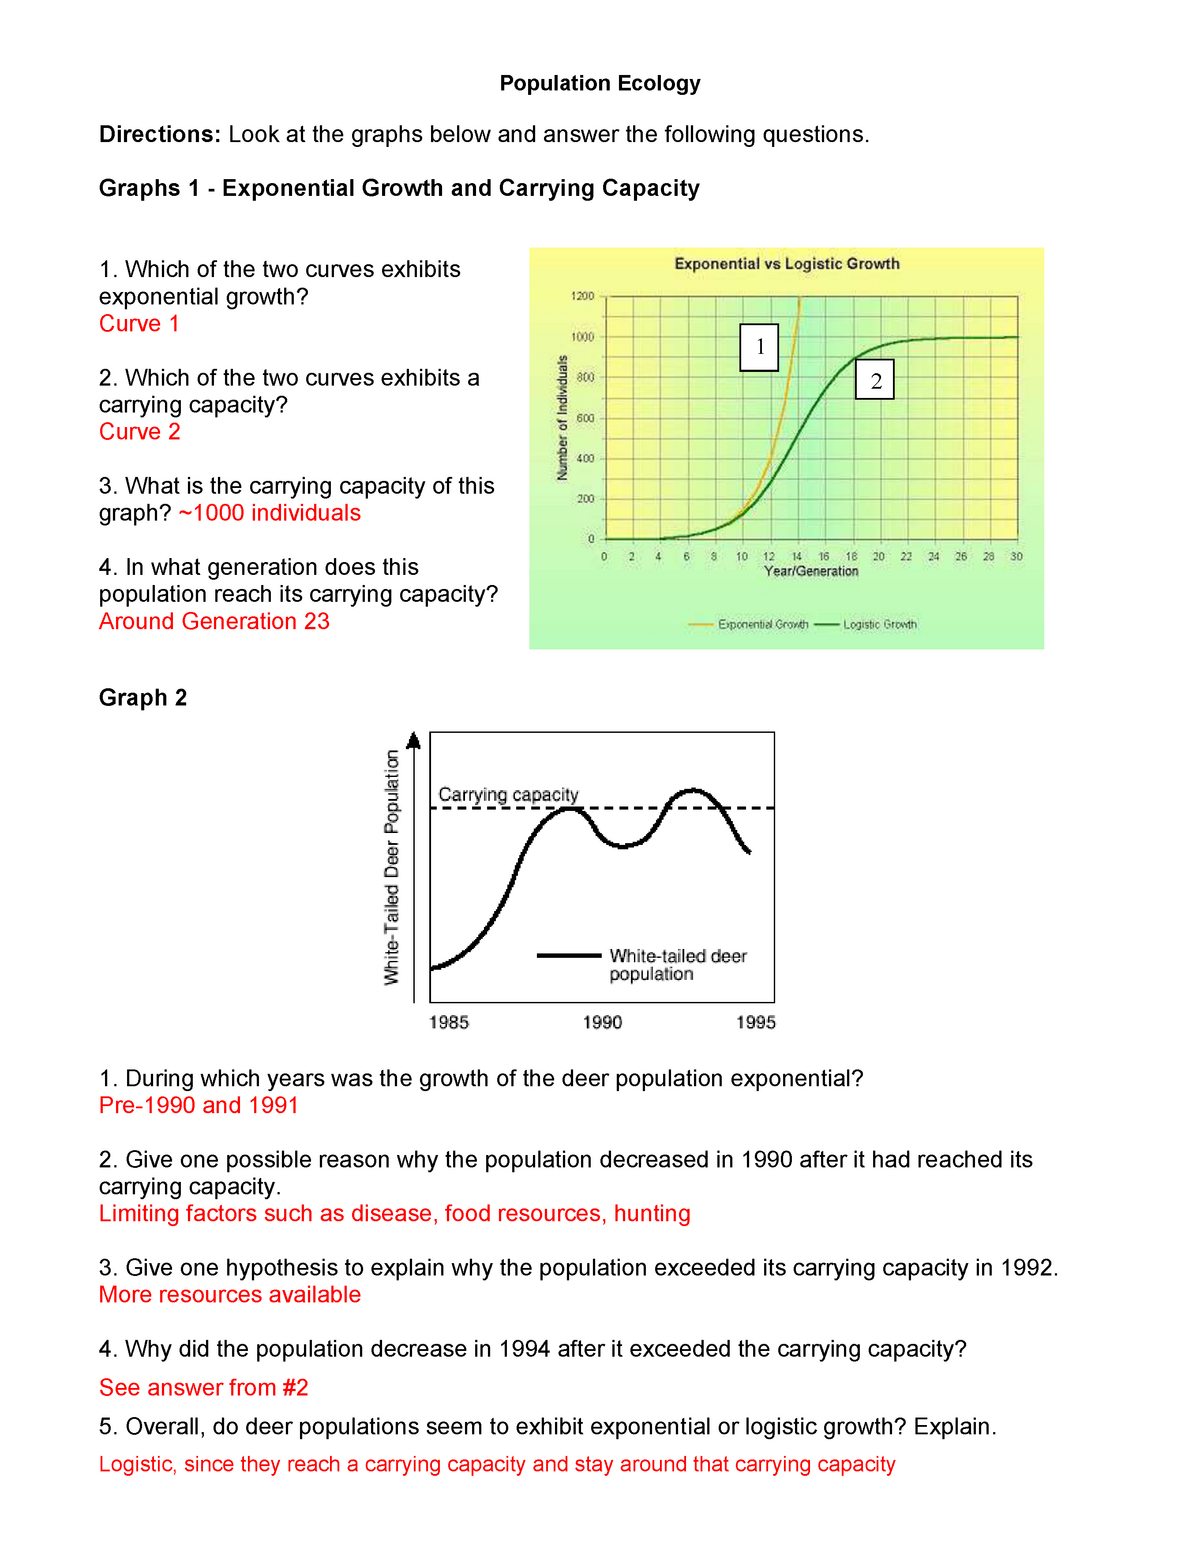 population-ecology-graph-worksheet-key-population-ecology-directions-look-at-the-graphs-below